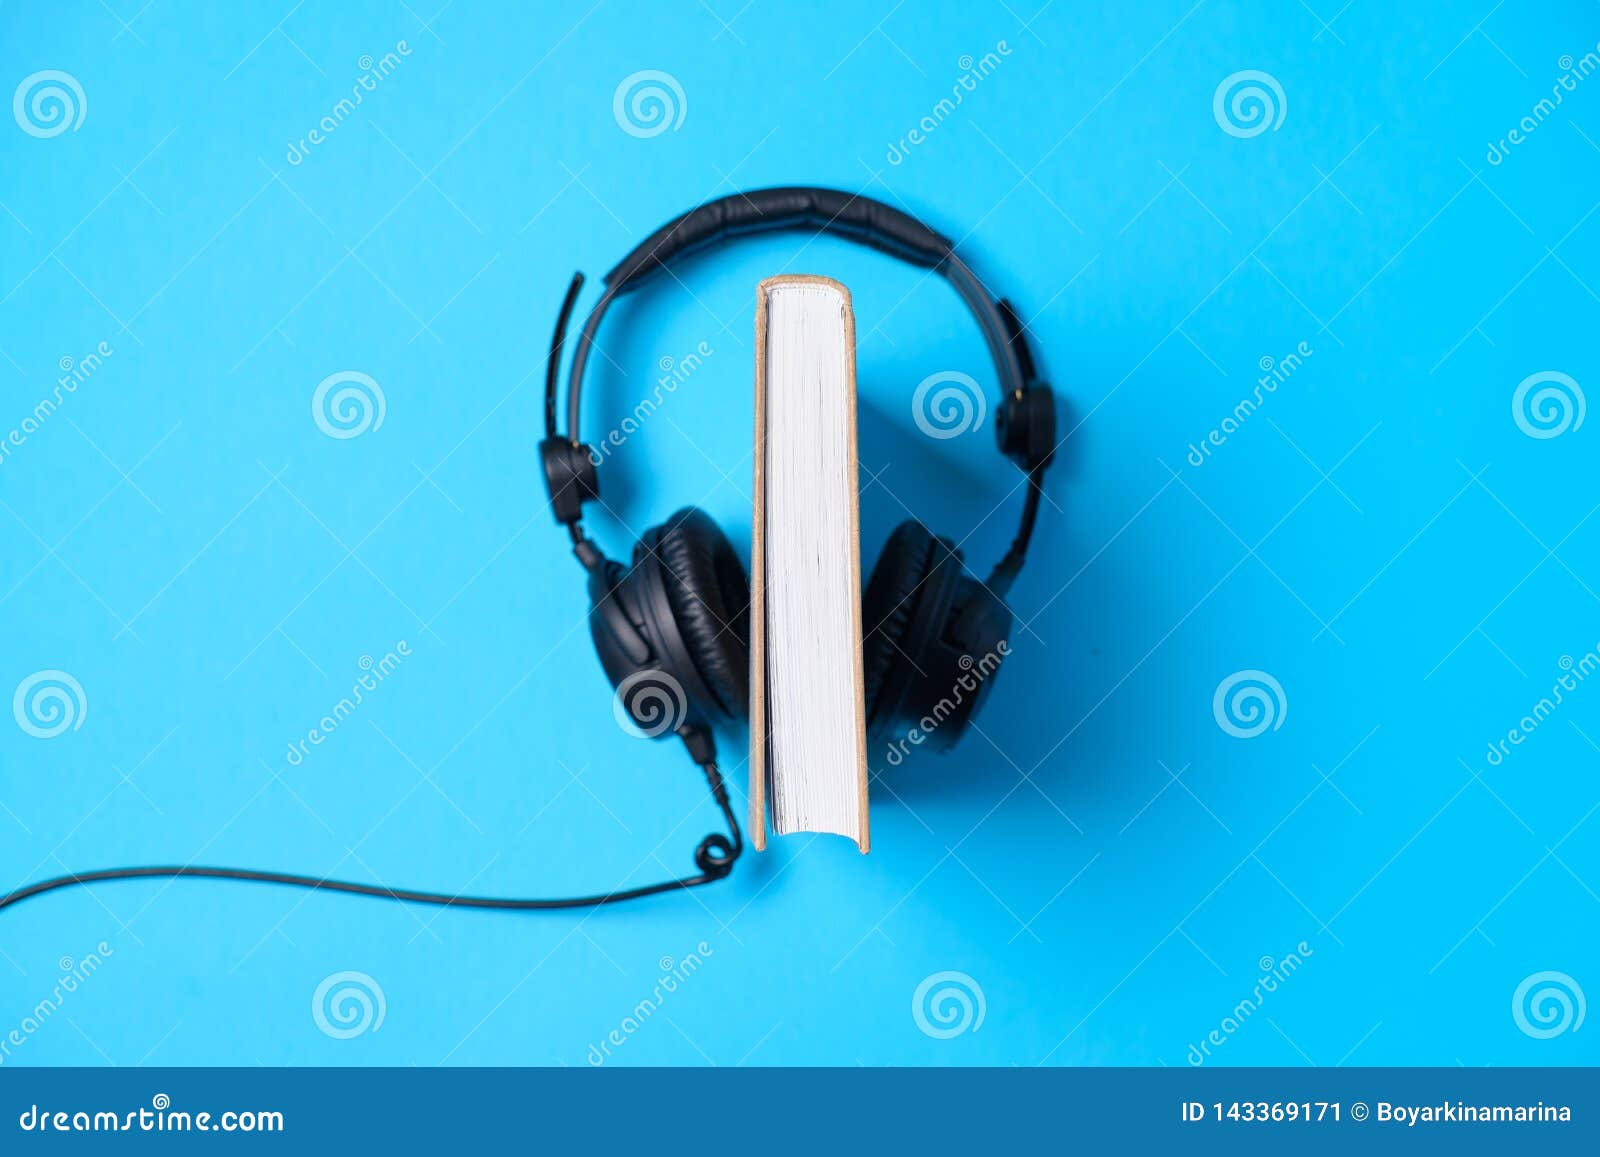 Music or Podcast Background Headphones with a Book on Blue Table, Flat Lay.  Top View, Flat Lay Stock Image - Image of media, online: 143369171